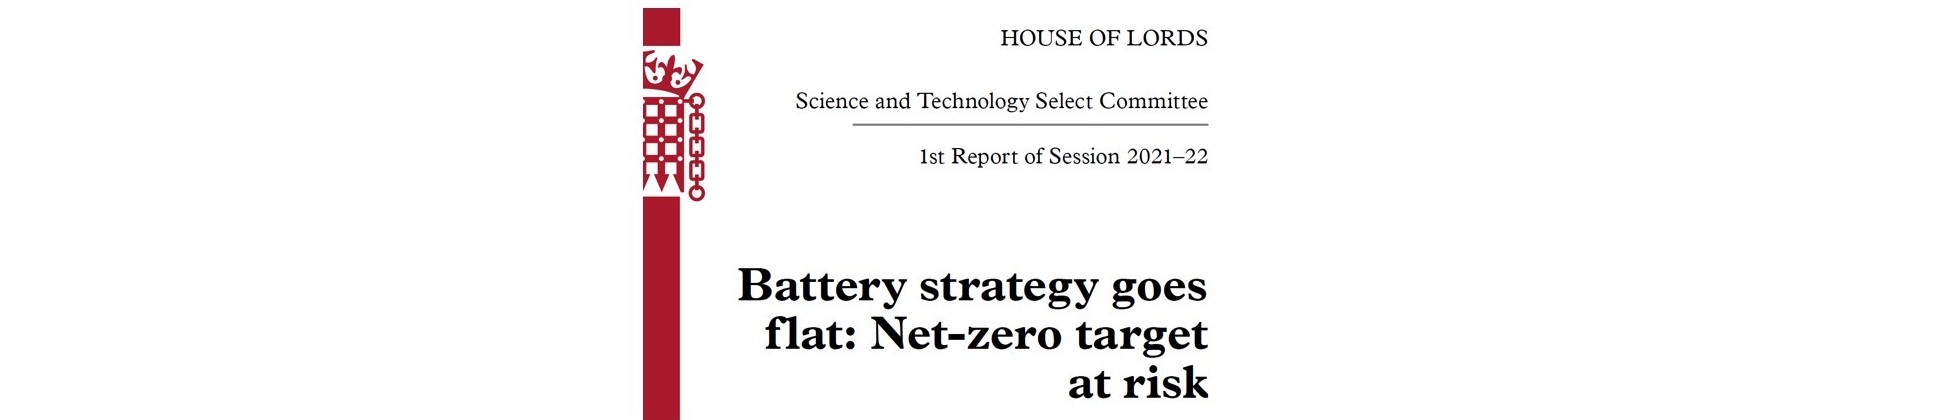 Report Header - House of Lords Science and Technology Select Committee: 'Battery strategy goes flat: Net-zero target at risk